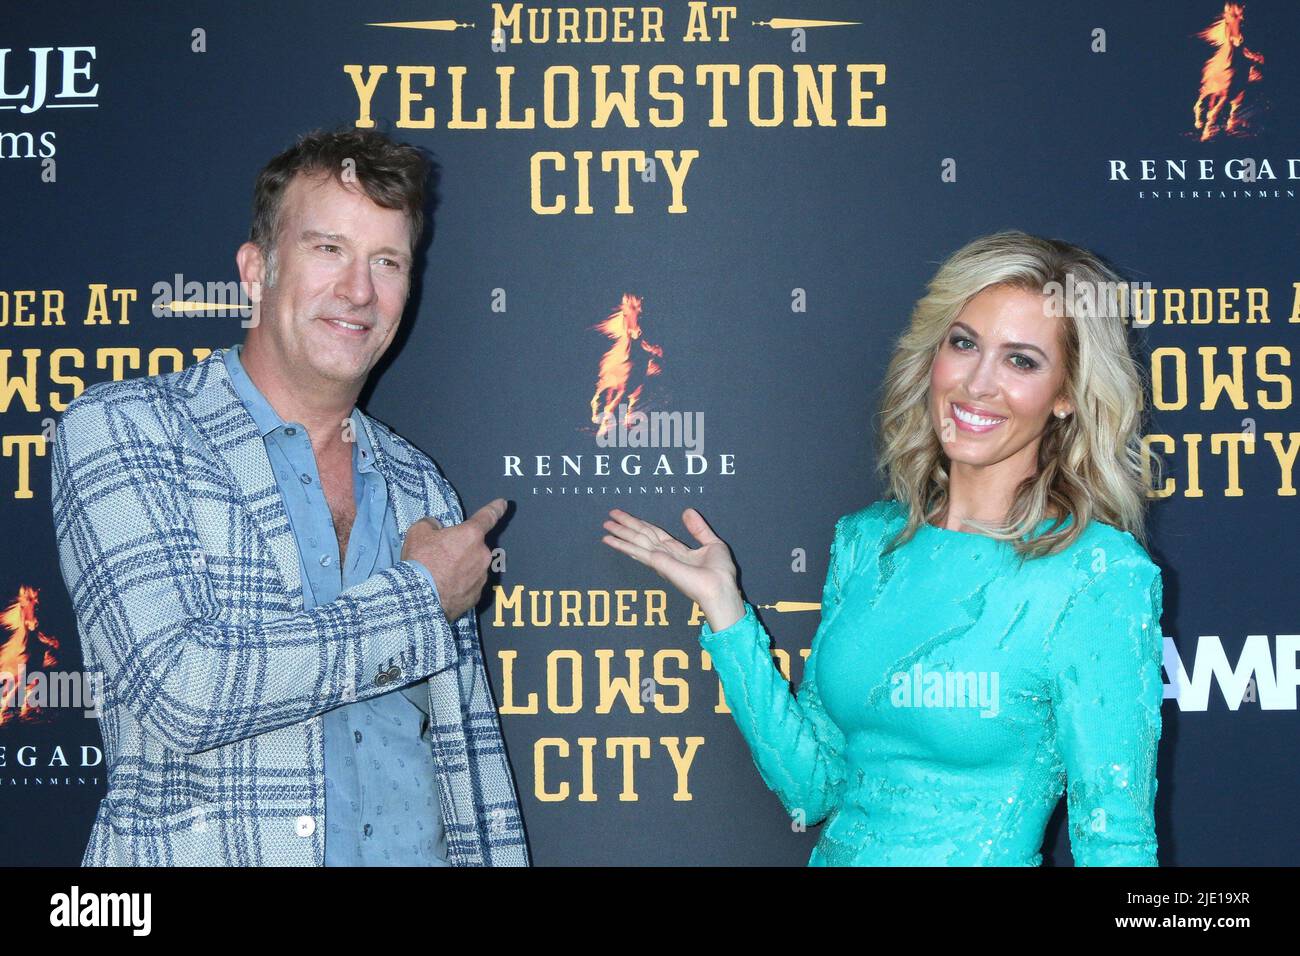 Los Angeles, CA. 23rd June, 2022. Thomas Jane, Courtney Lauren Penn at arrivals for MURDER AT YELLOWSTONE CITY Premiere, Harmony Gold Theater, Los Angeles, CA June 23, 2022. Credit: Priscilla Grant/Everett Collection/Alamy Live News Stock Photo